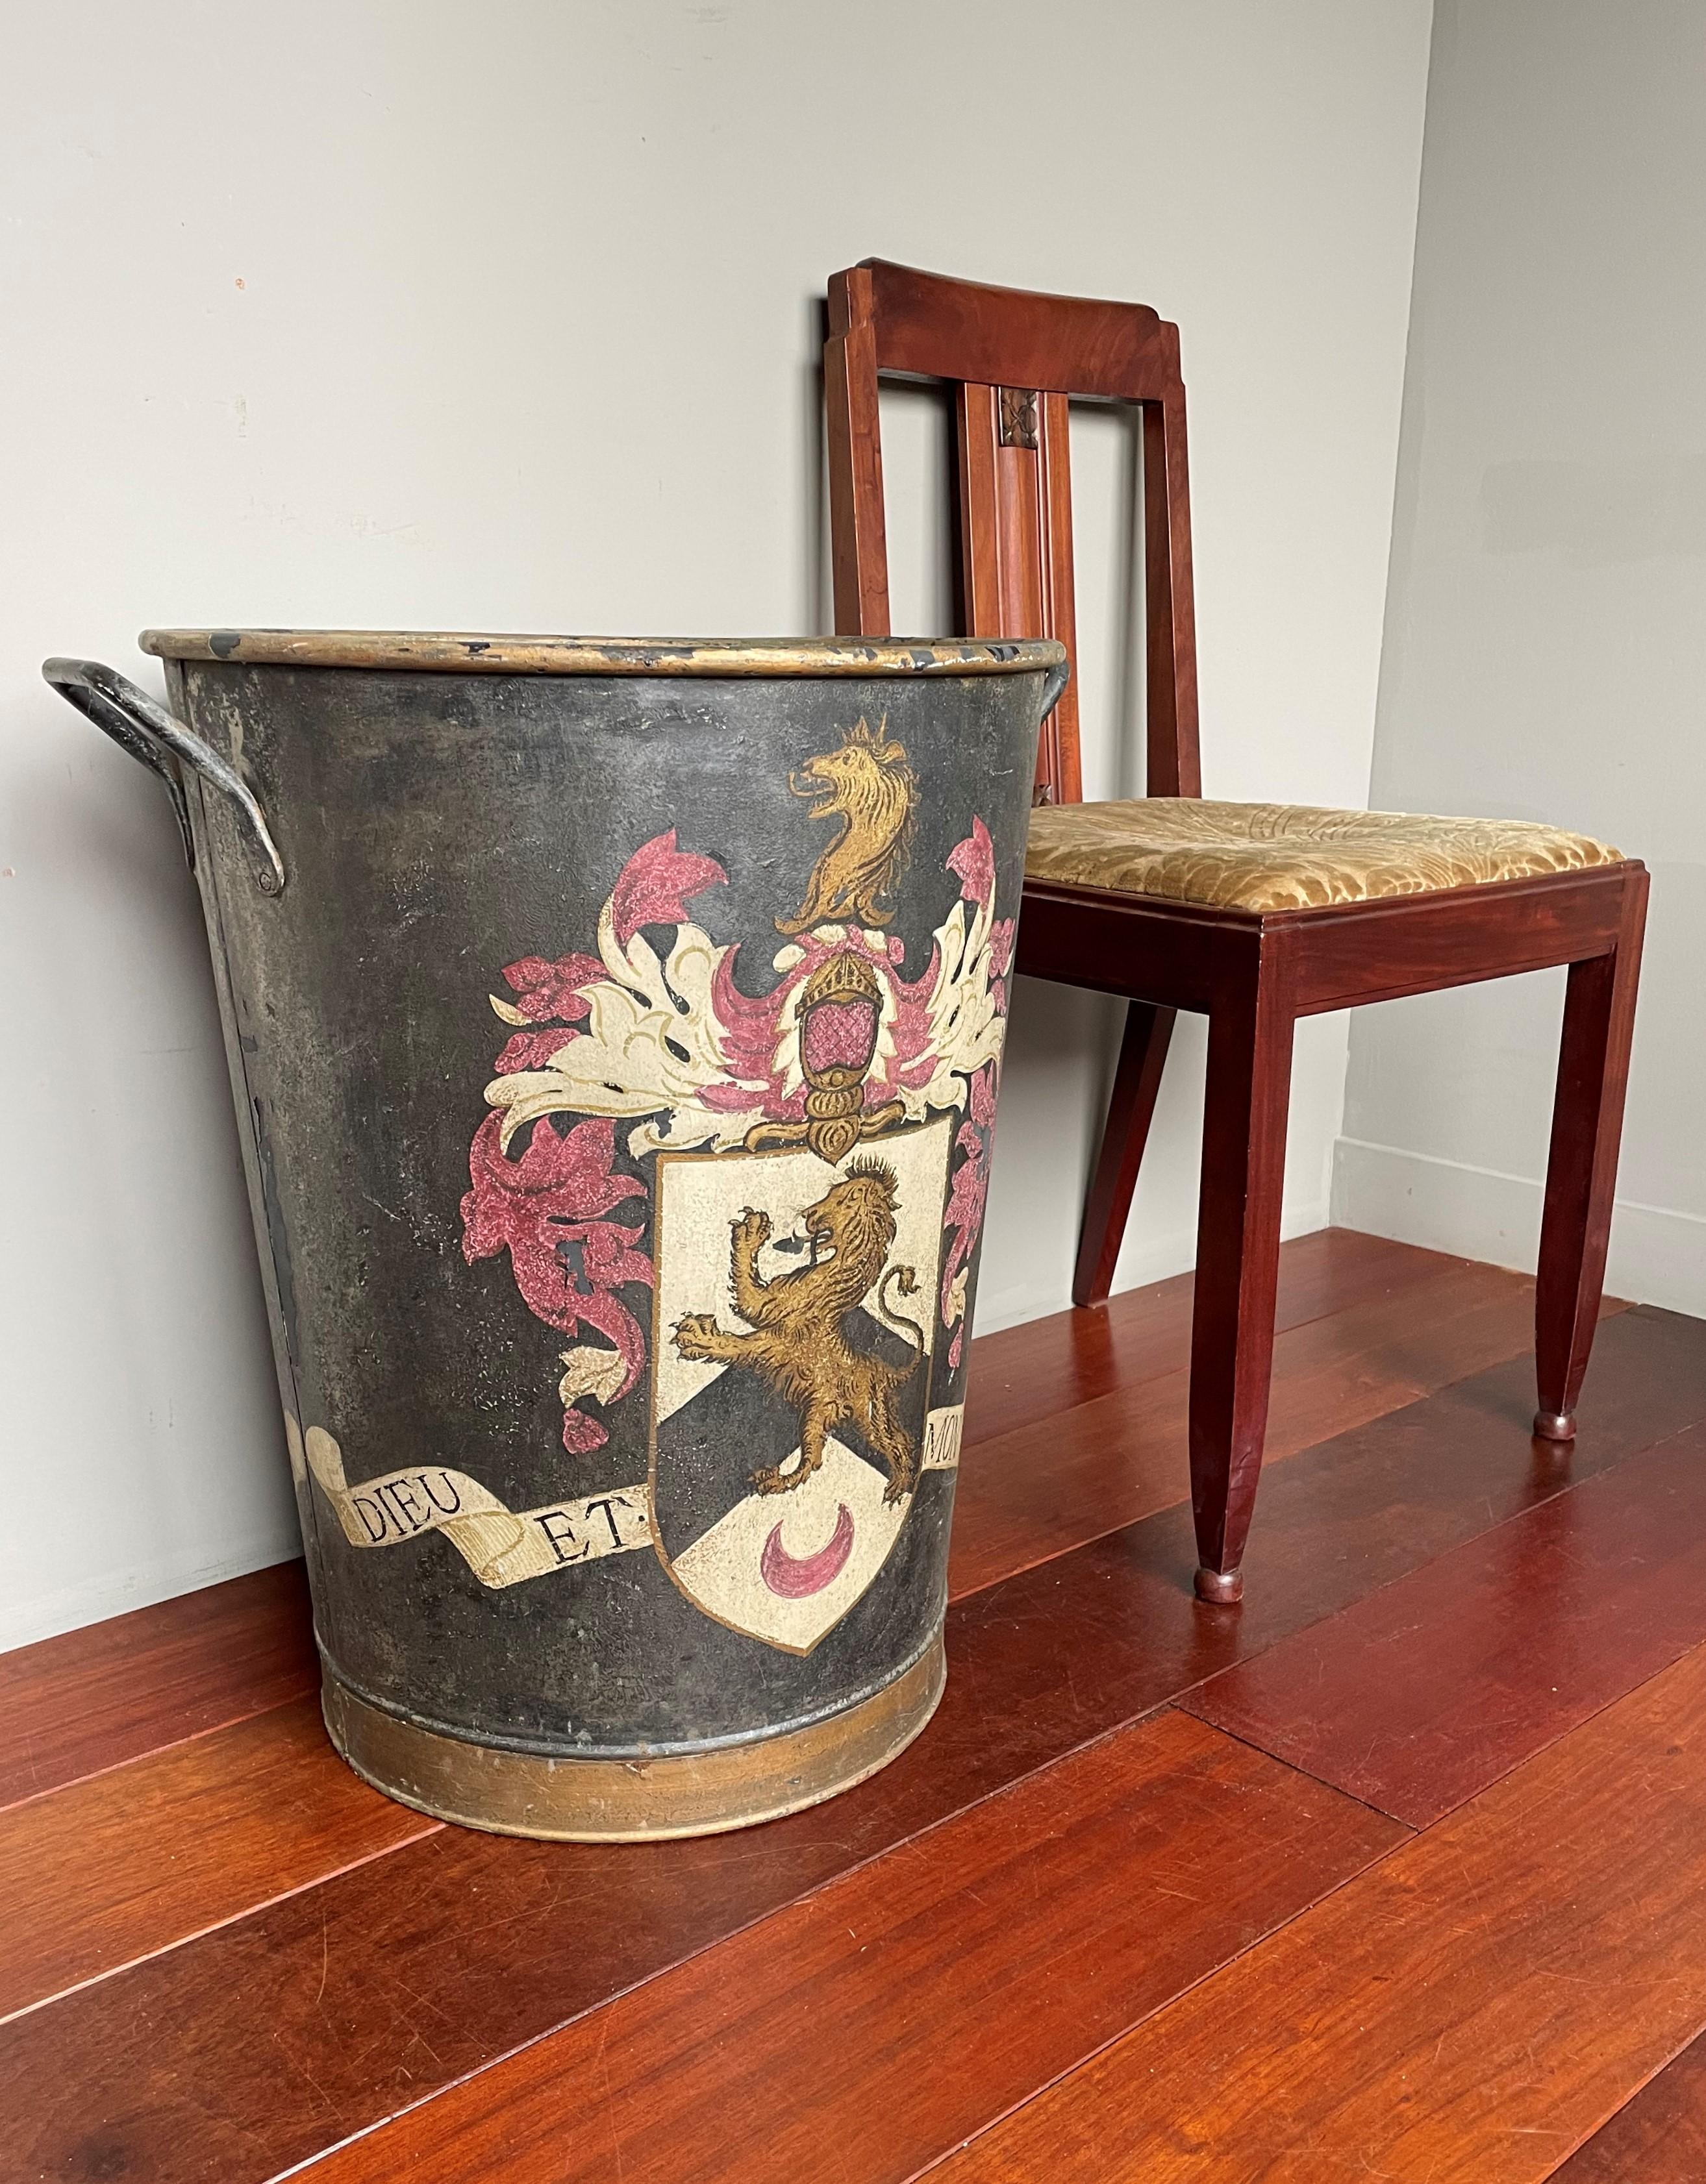 Largest Antique Firewood Bucket / Planter with British Crest 'God and My Right' 6